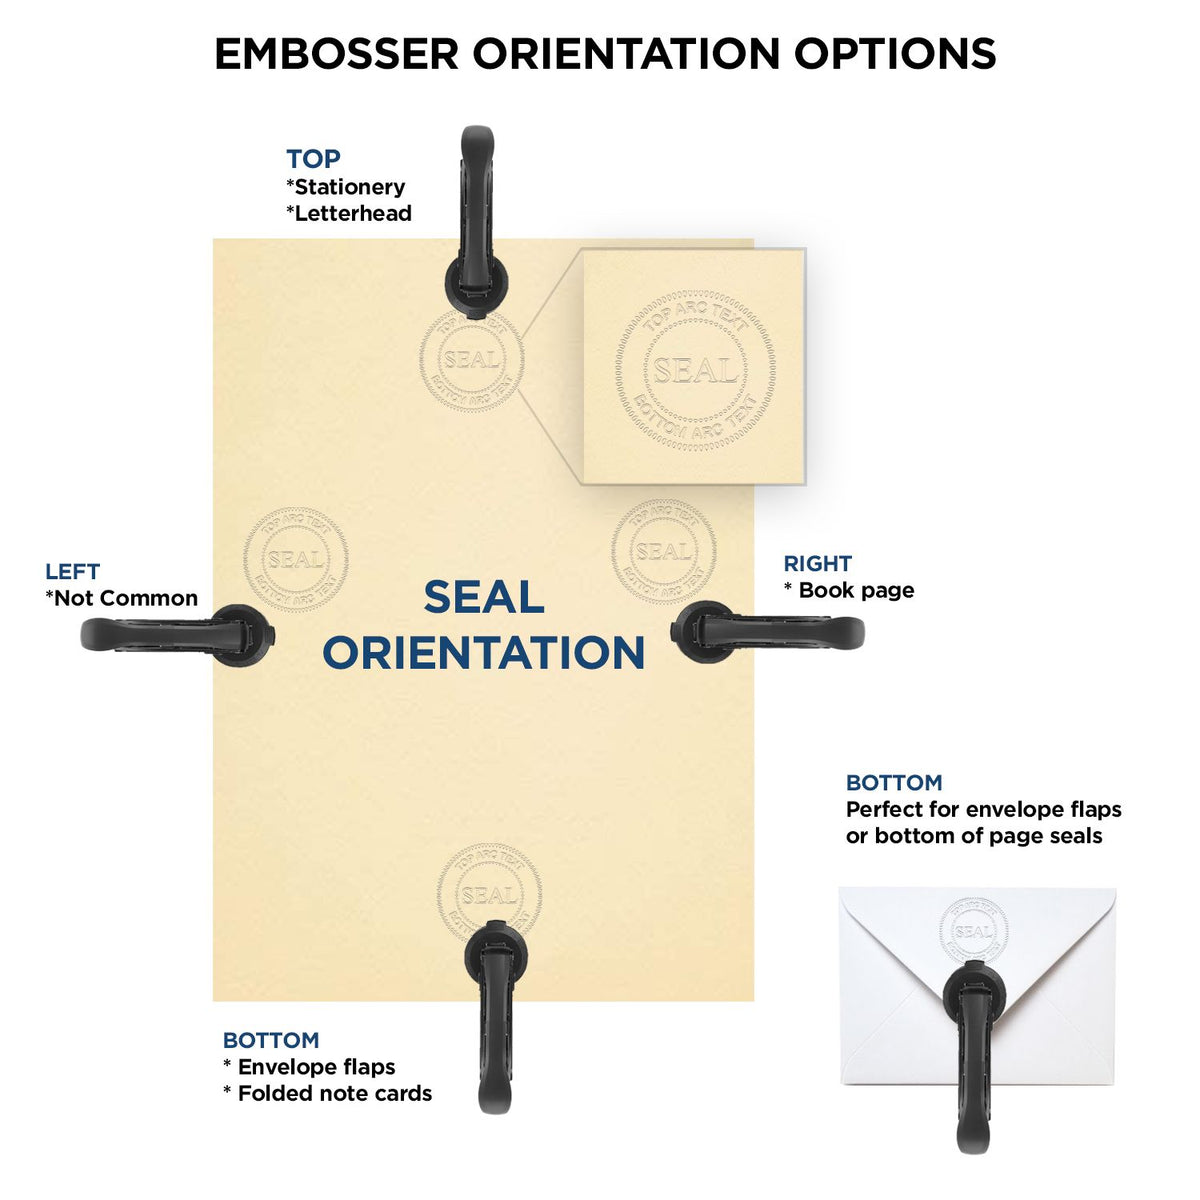 An infographic for the Maine Desk Surveyor Seal Embosser showing embosser orientation, this is showing examples of a top, bottom, right and left insert.